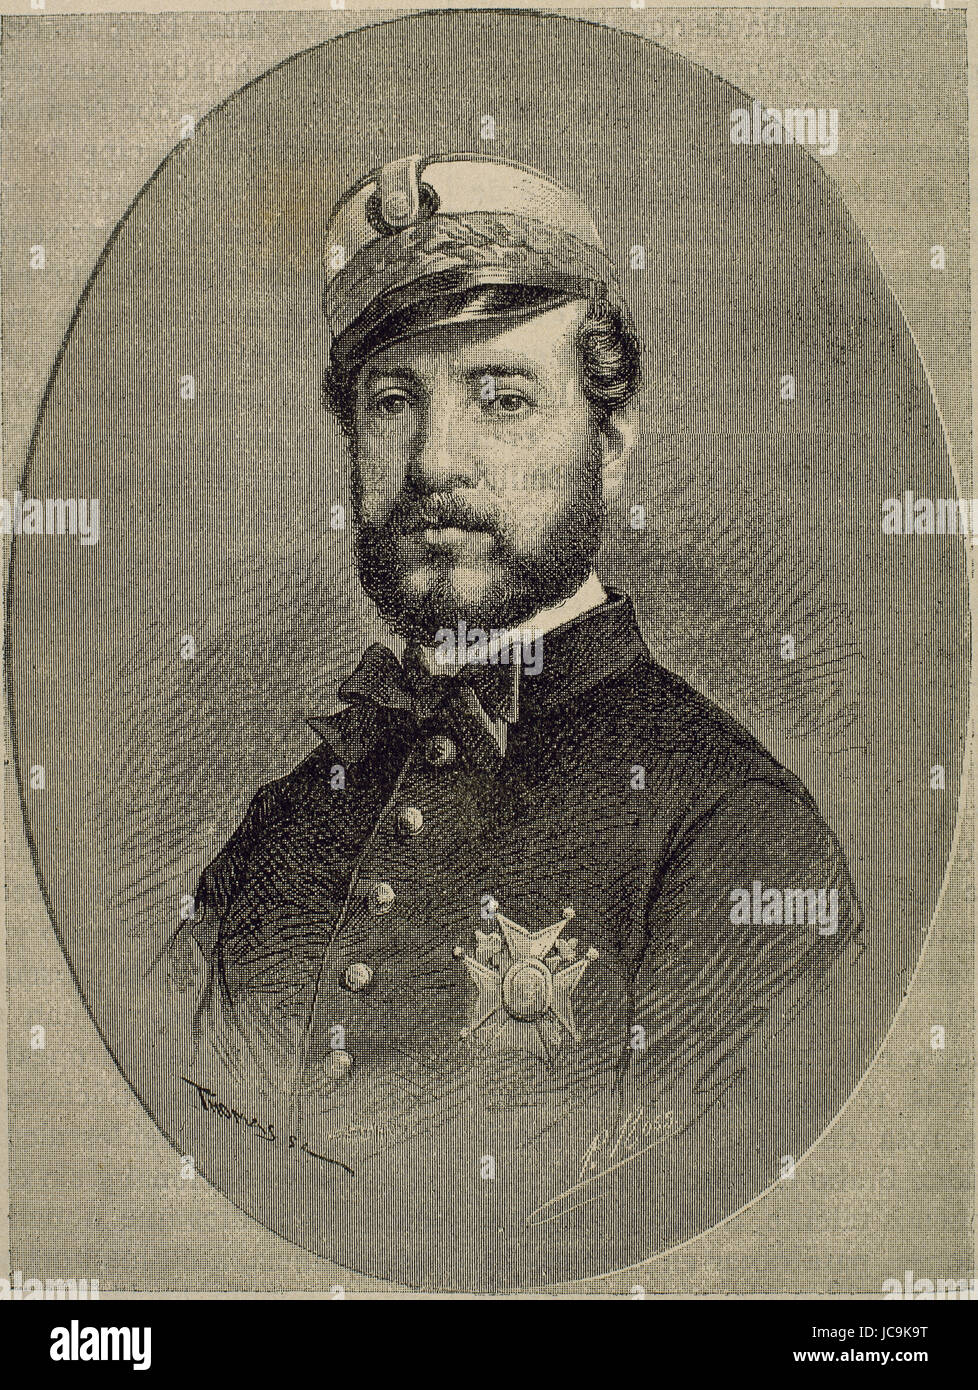 Juan Prim (1814-1870). Spanish  politician and military. Portrait. Engraving by P. Roos, 1883. Stock Photo